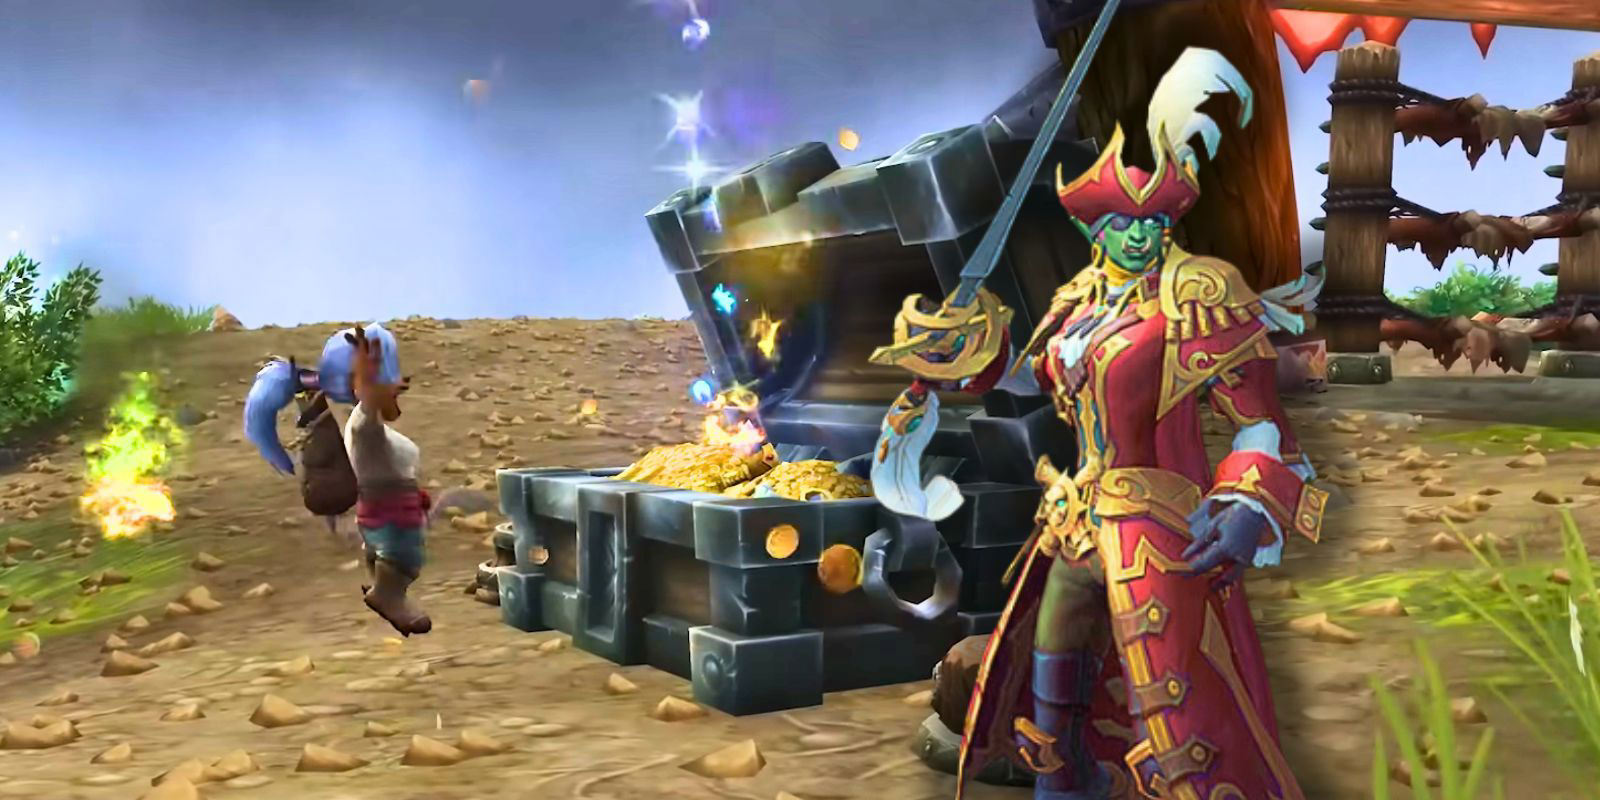 10 Things In World Of Warcraft’s Plunderstorm Update That Make WoW ...